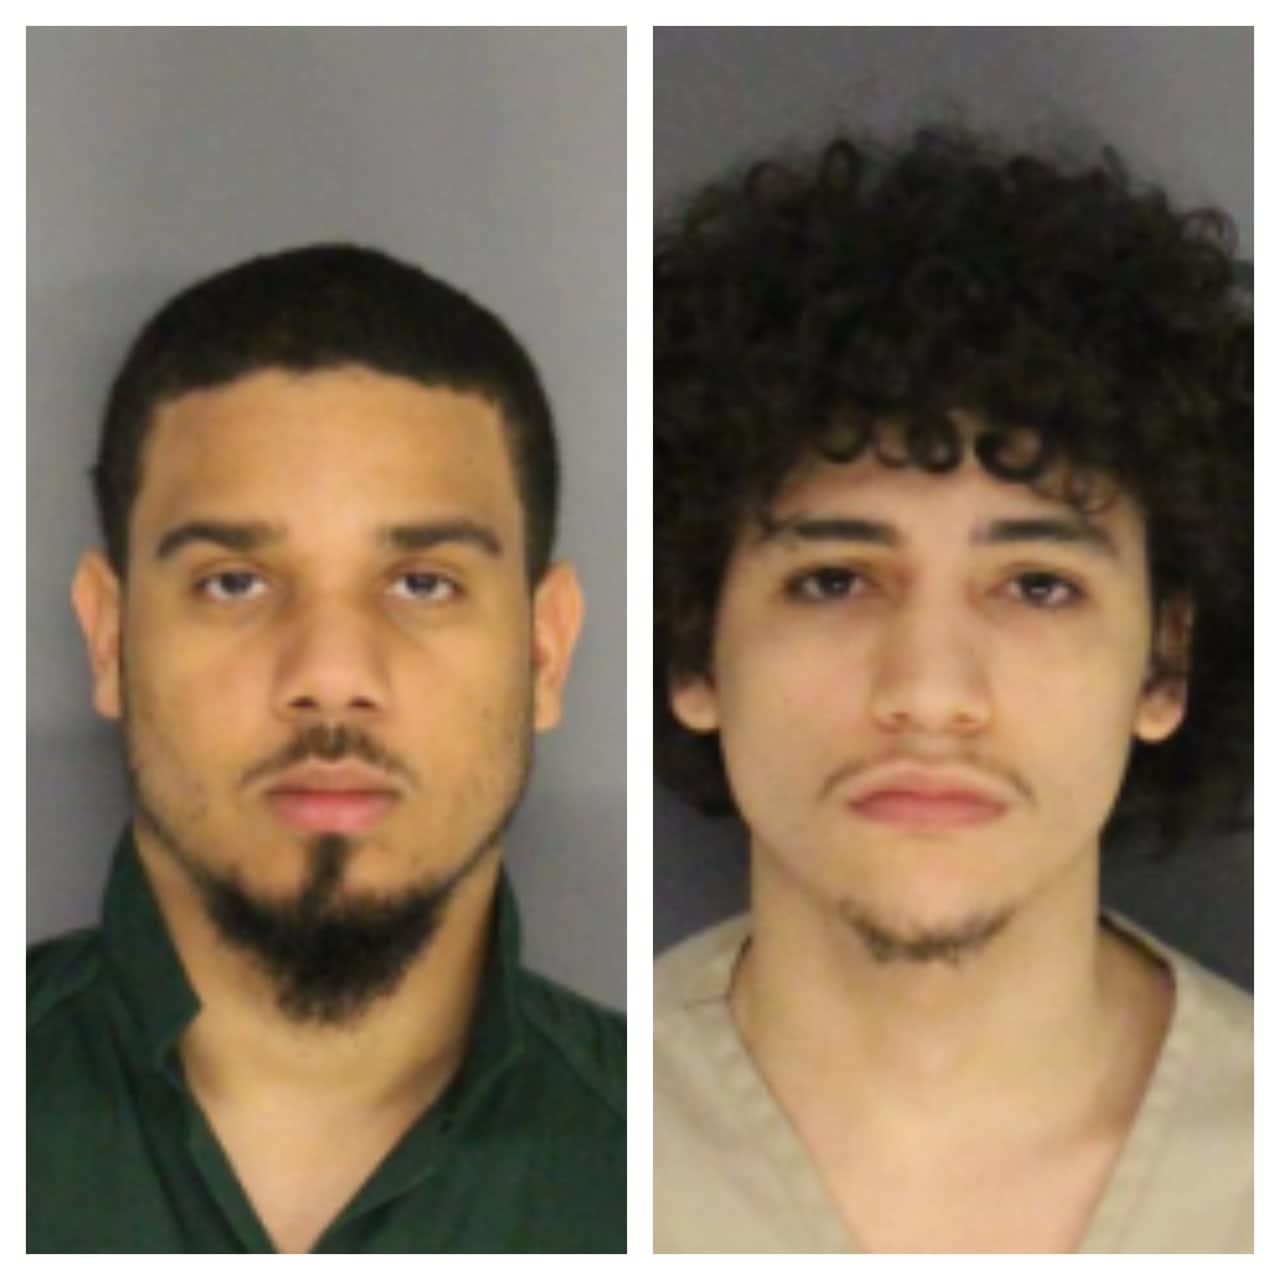 Three Men Charged In New Year's Elizabeth Homicide: Prosecutor